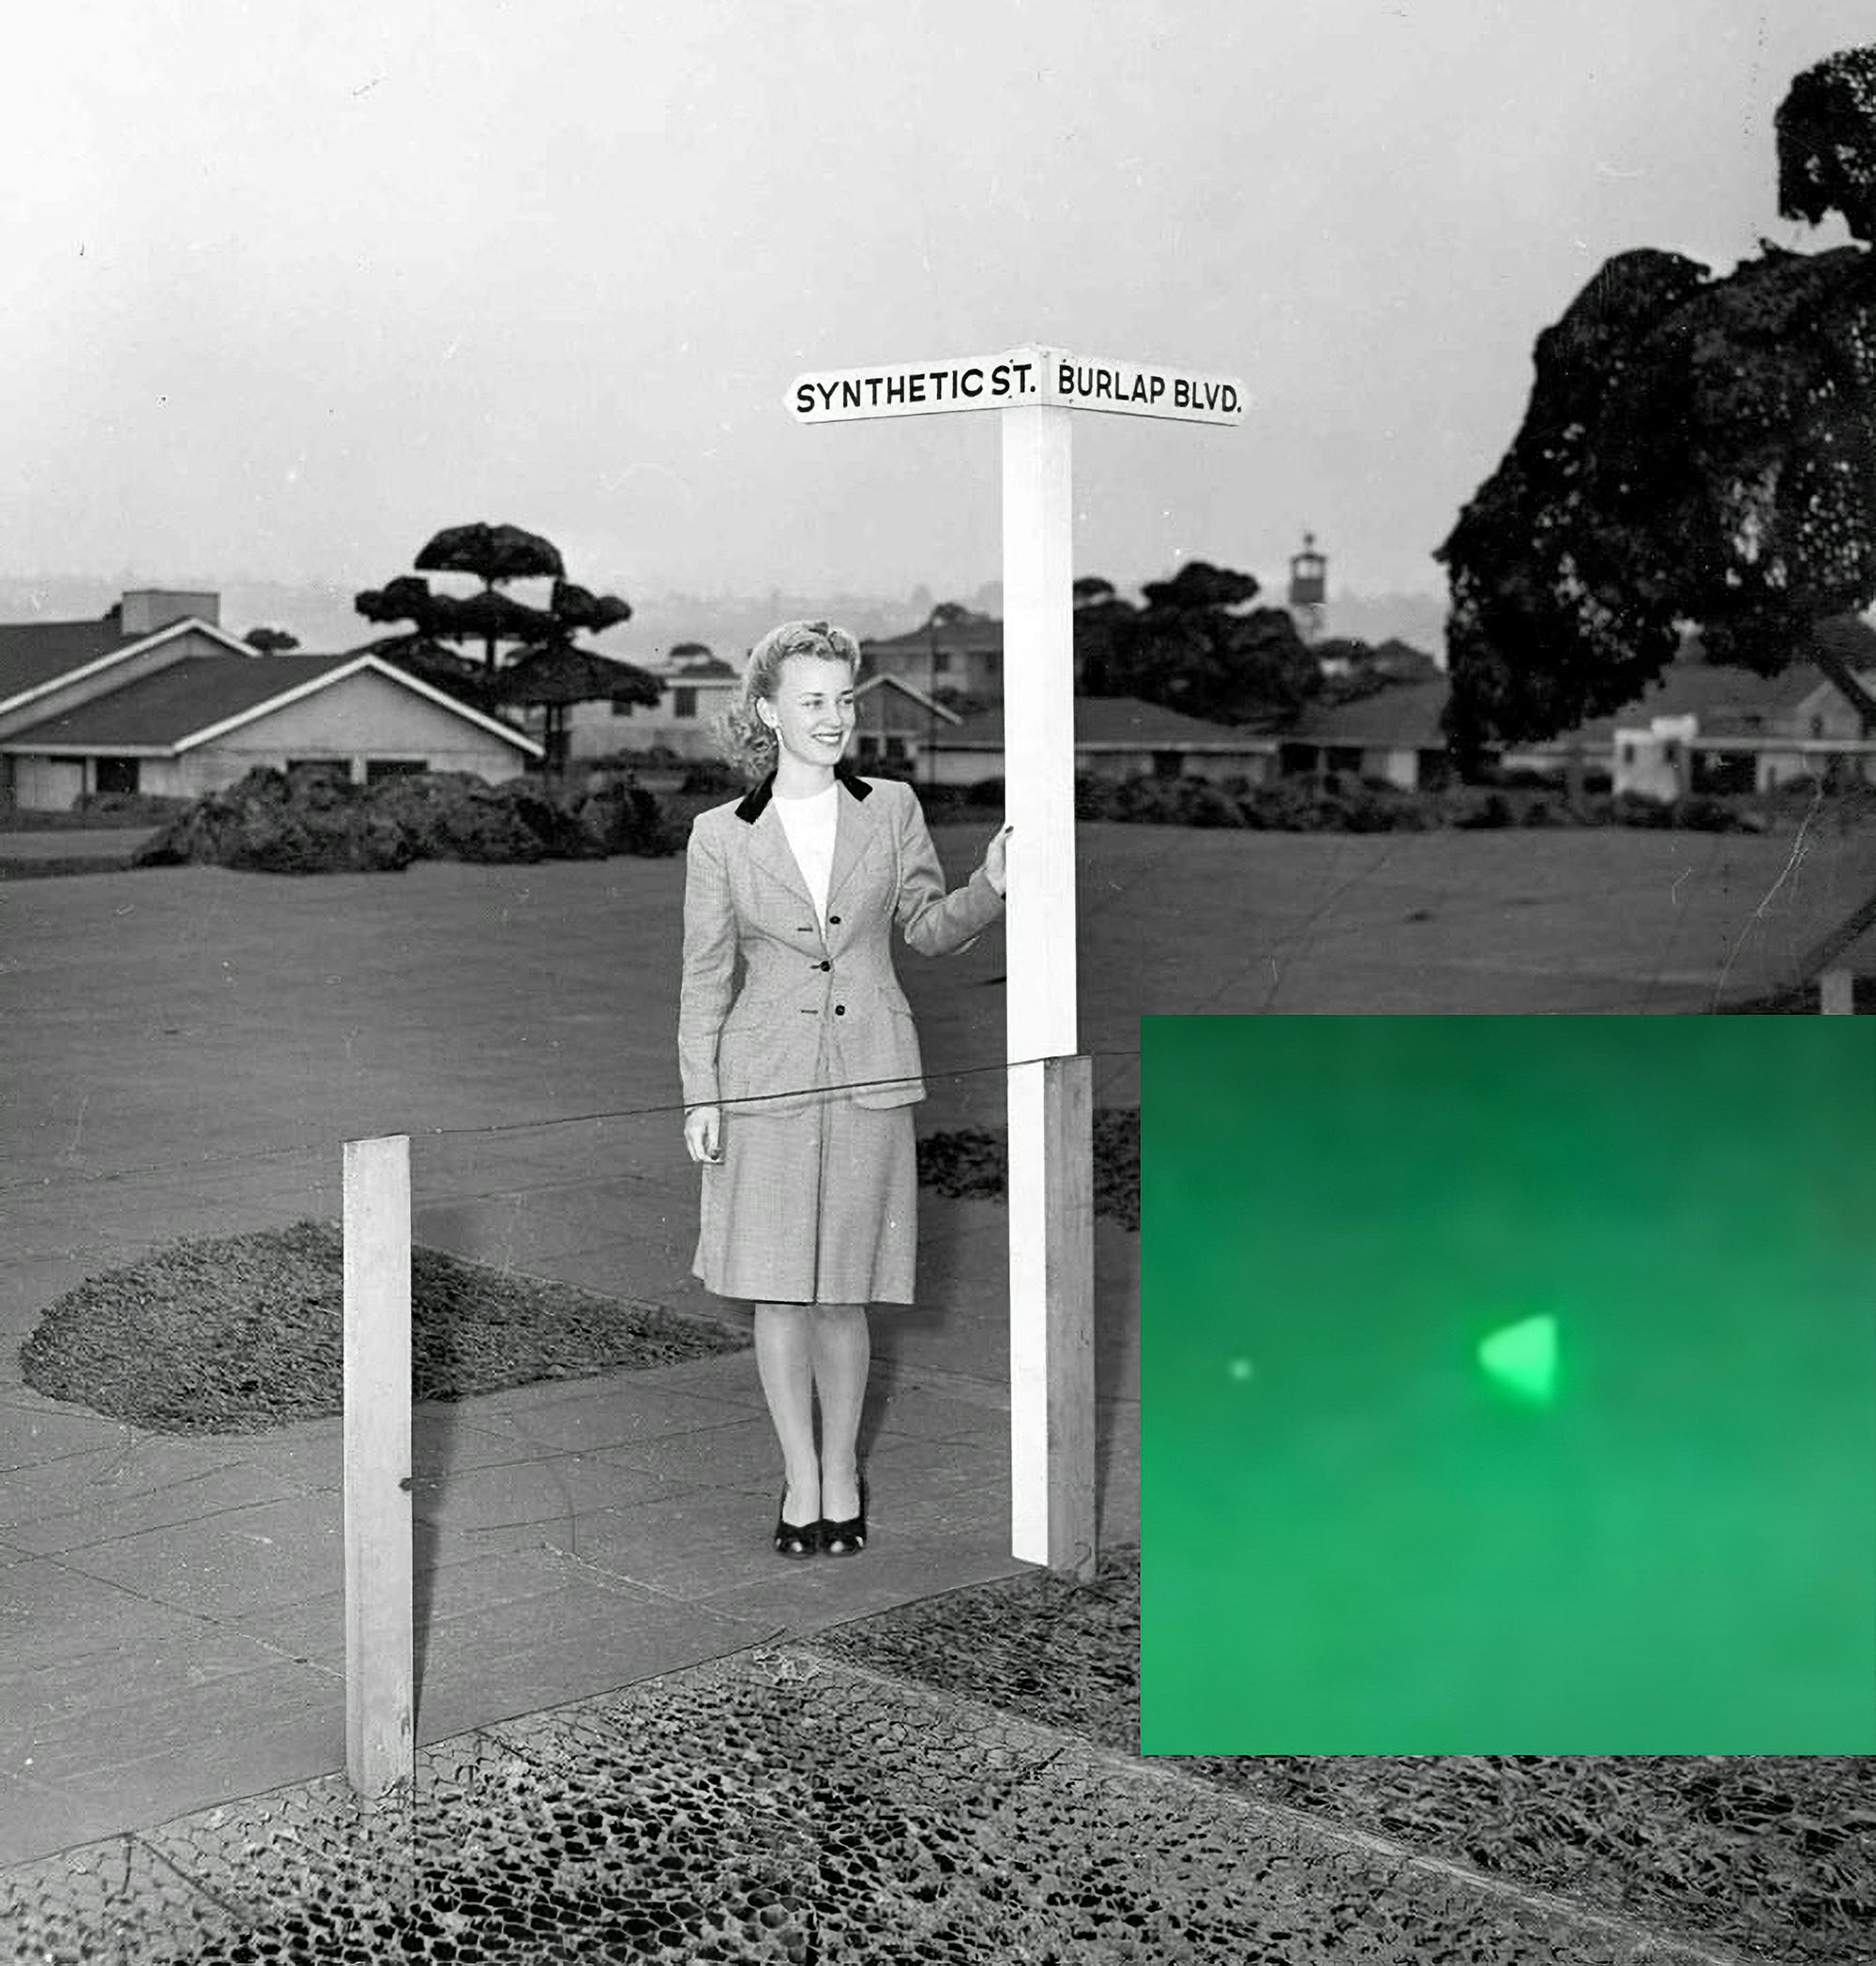 Archival image of a woman posing at a street sign reading 'syntethic street' and 'burlap blvd', superimposed by a night vision image of an unidentified flying object © Andrea Orejarena & Caleb Stein